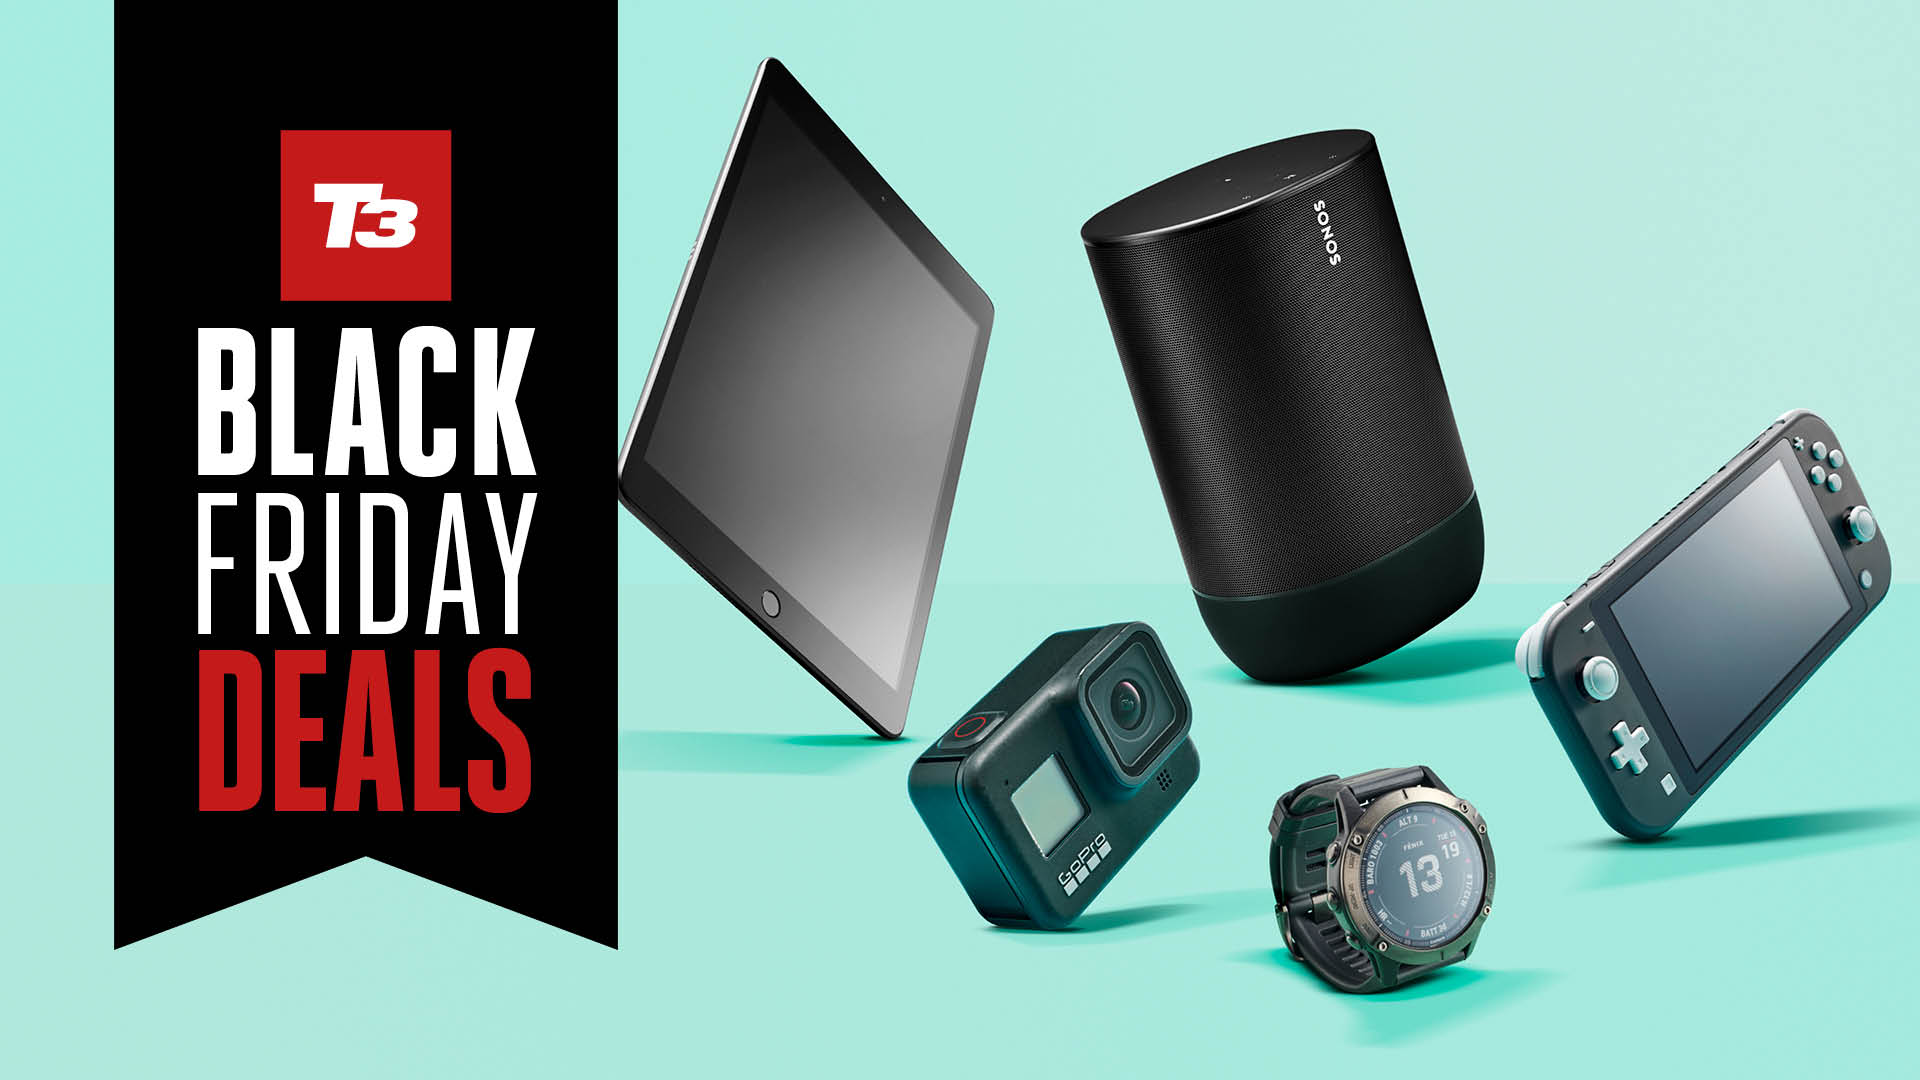 Best Black Friday Deals Airpods Nintendo Switch Fitbit Samsung Lg Tvs And More On Sale Now T3